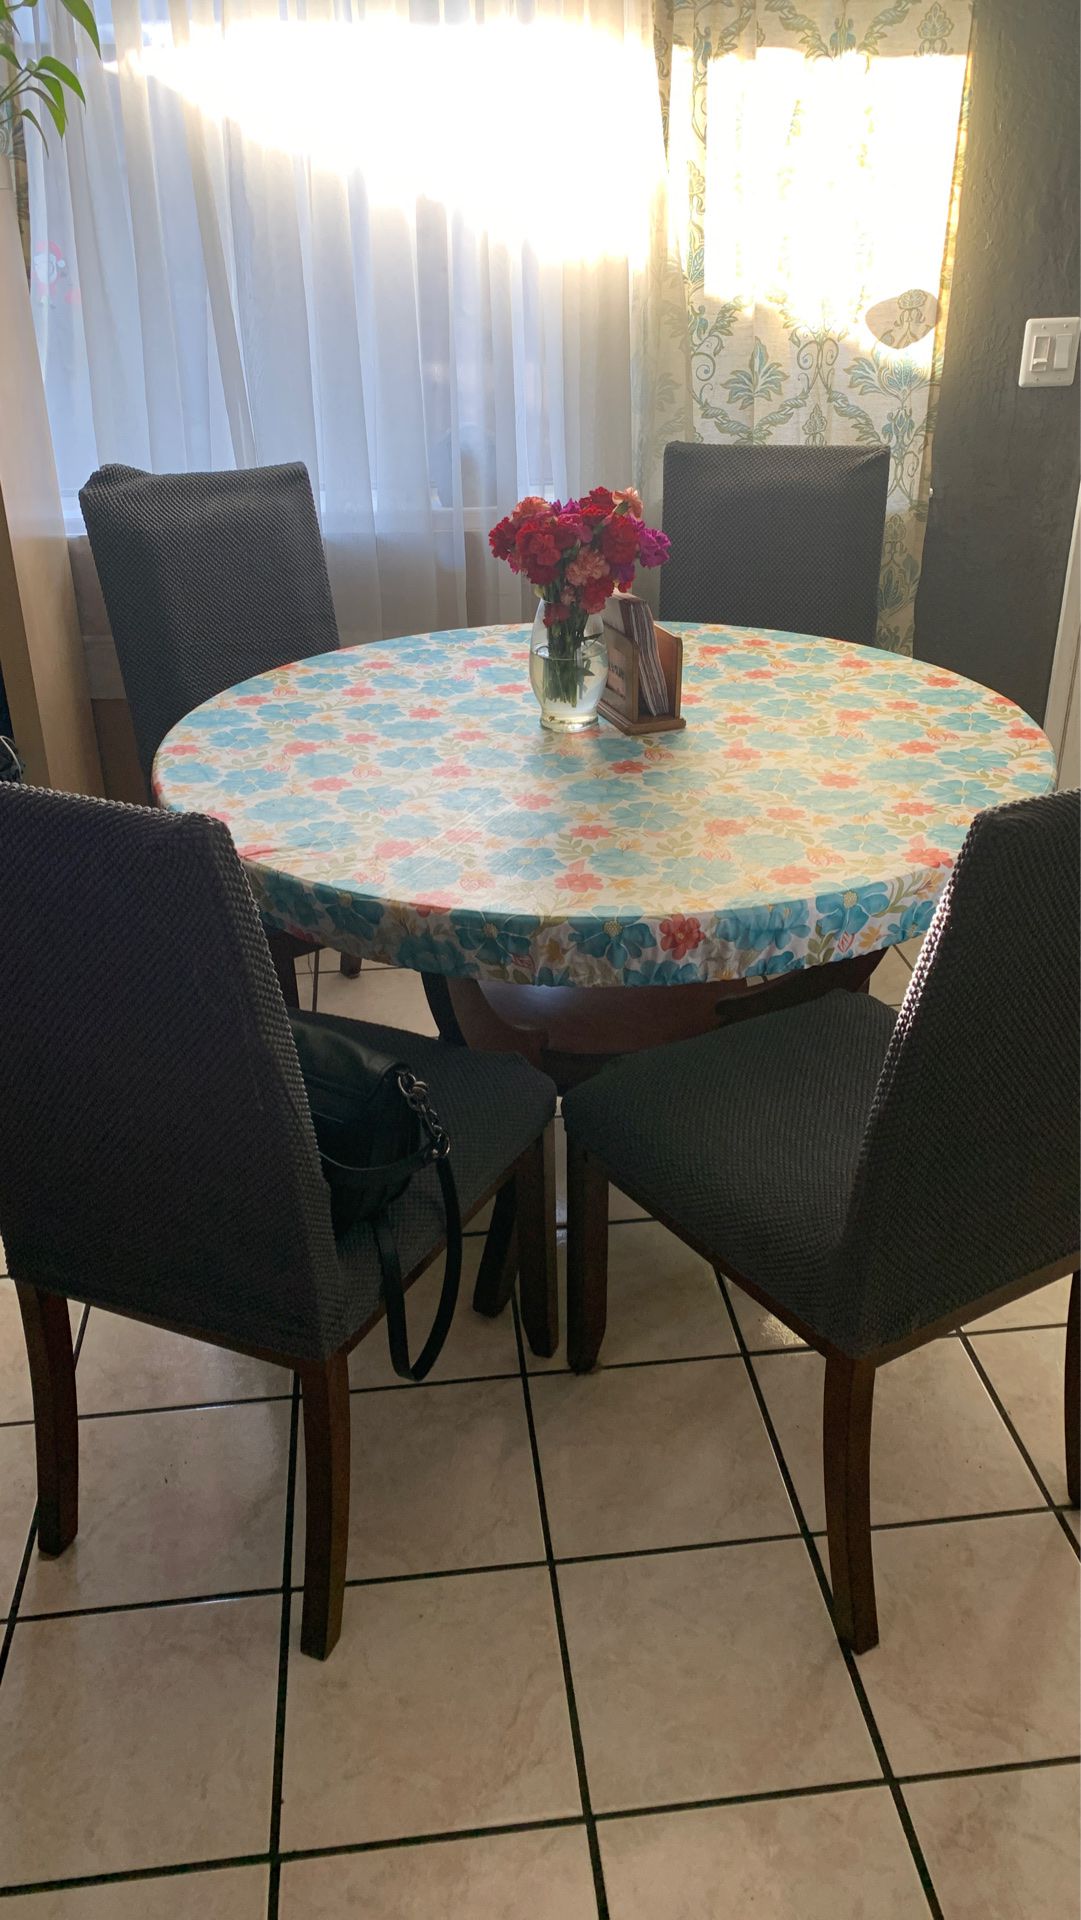 Dining table for sale 100.00 or best offer